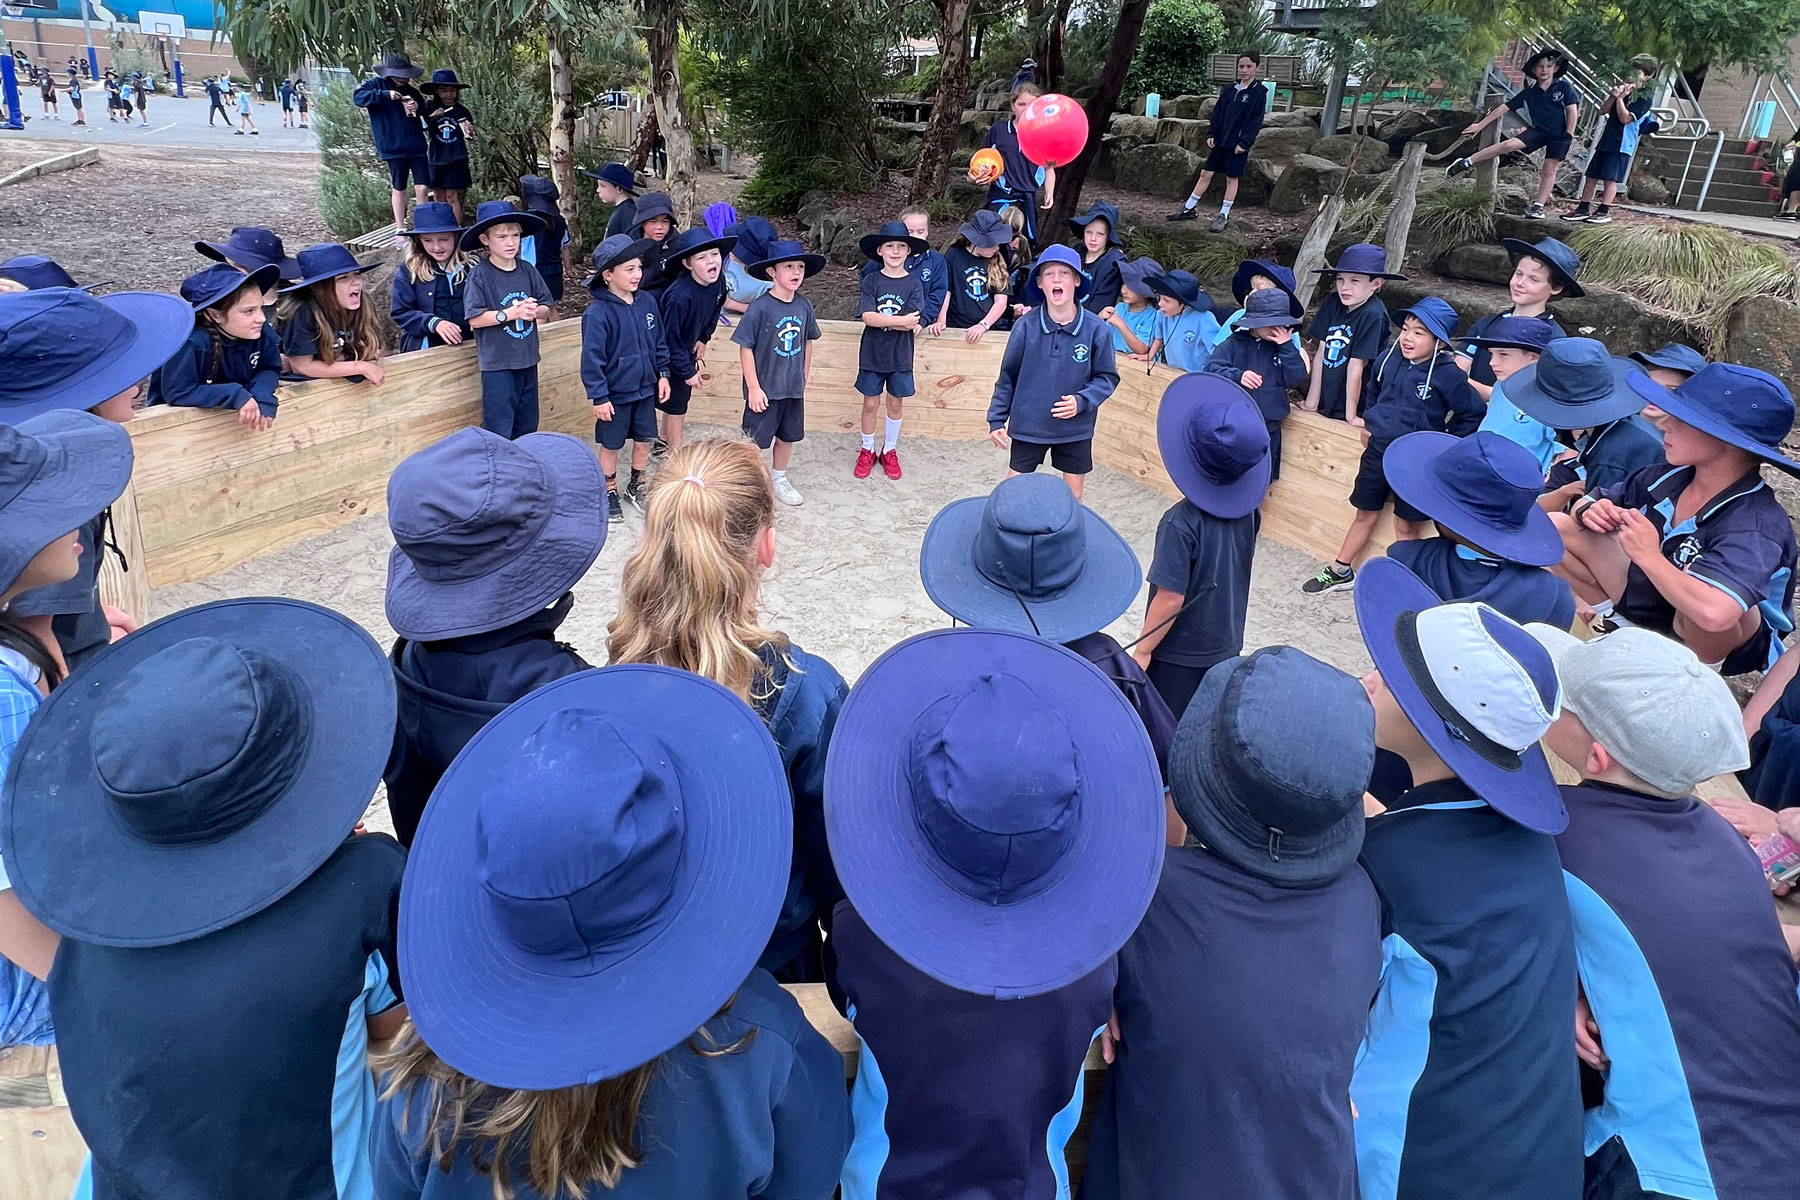 Ivanhoe East Primary students having fun playing with a ball in a Gaga pit